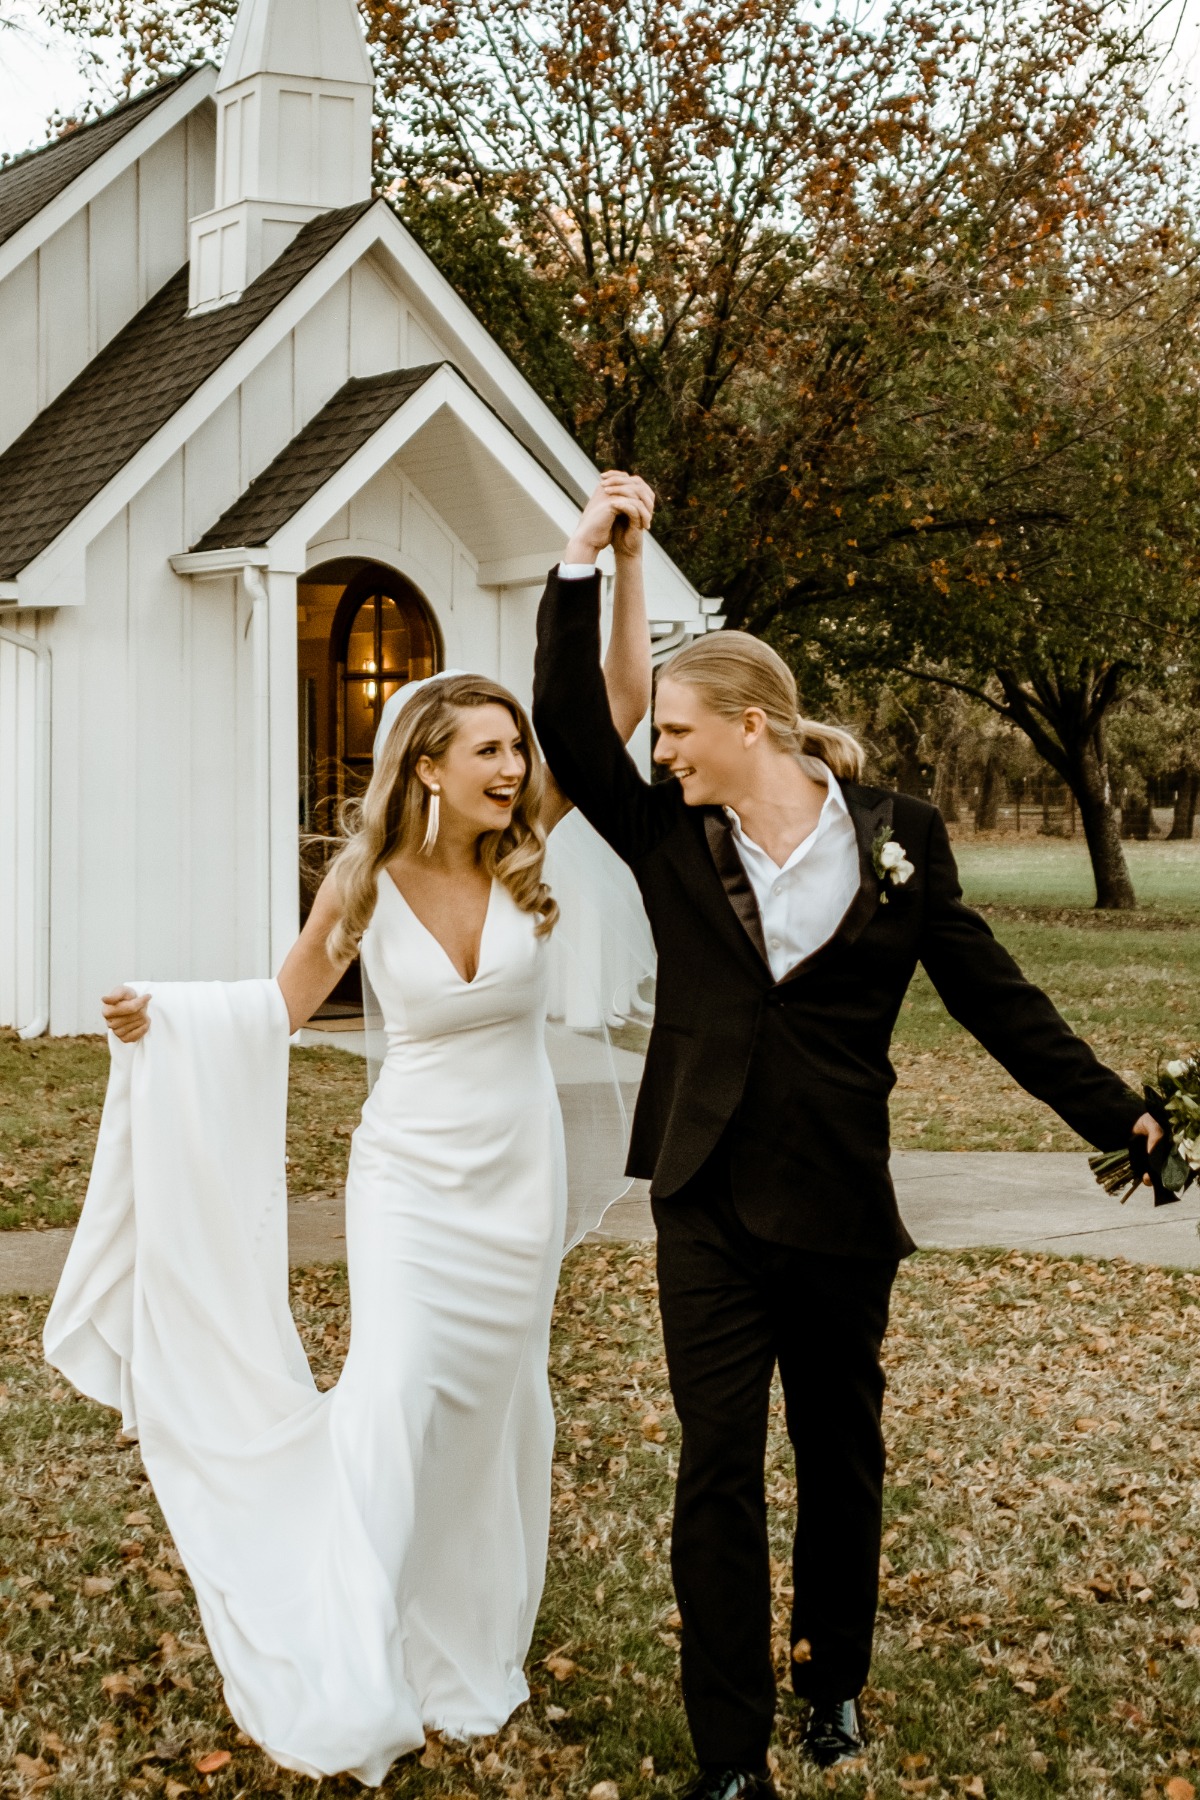 How To Plan A Modern Texas Wedding With A Victorian Twist